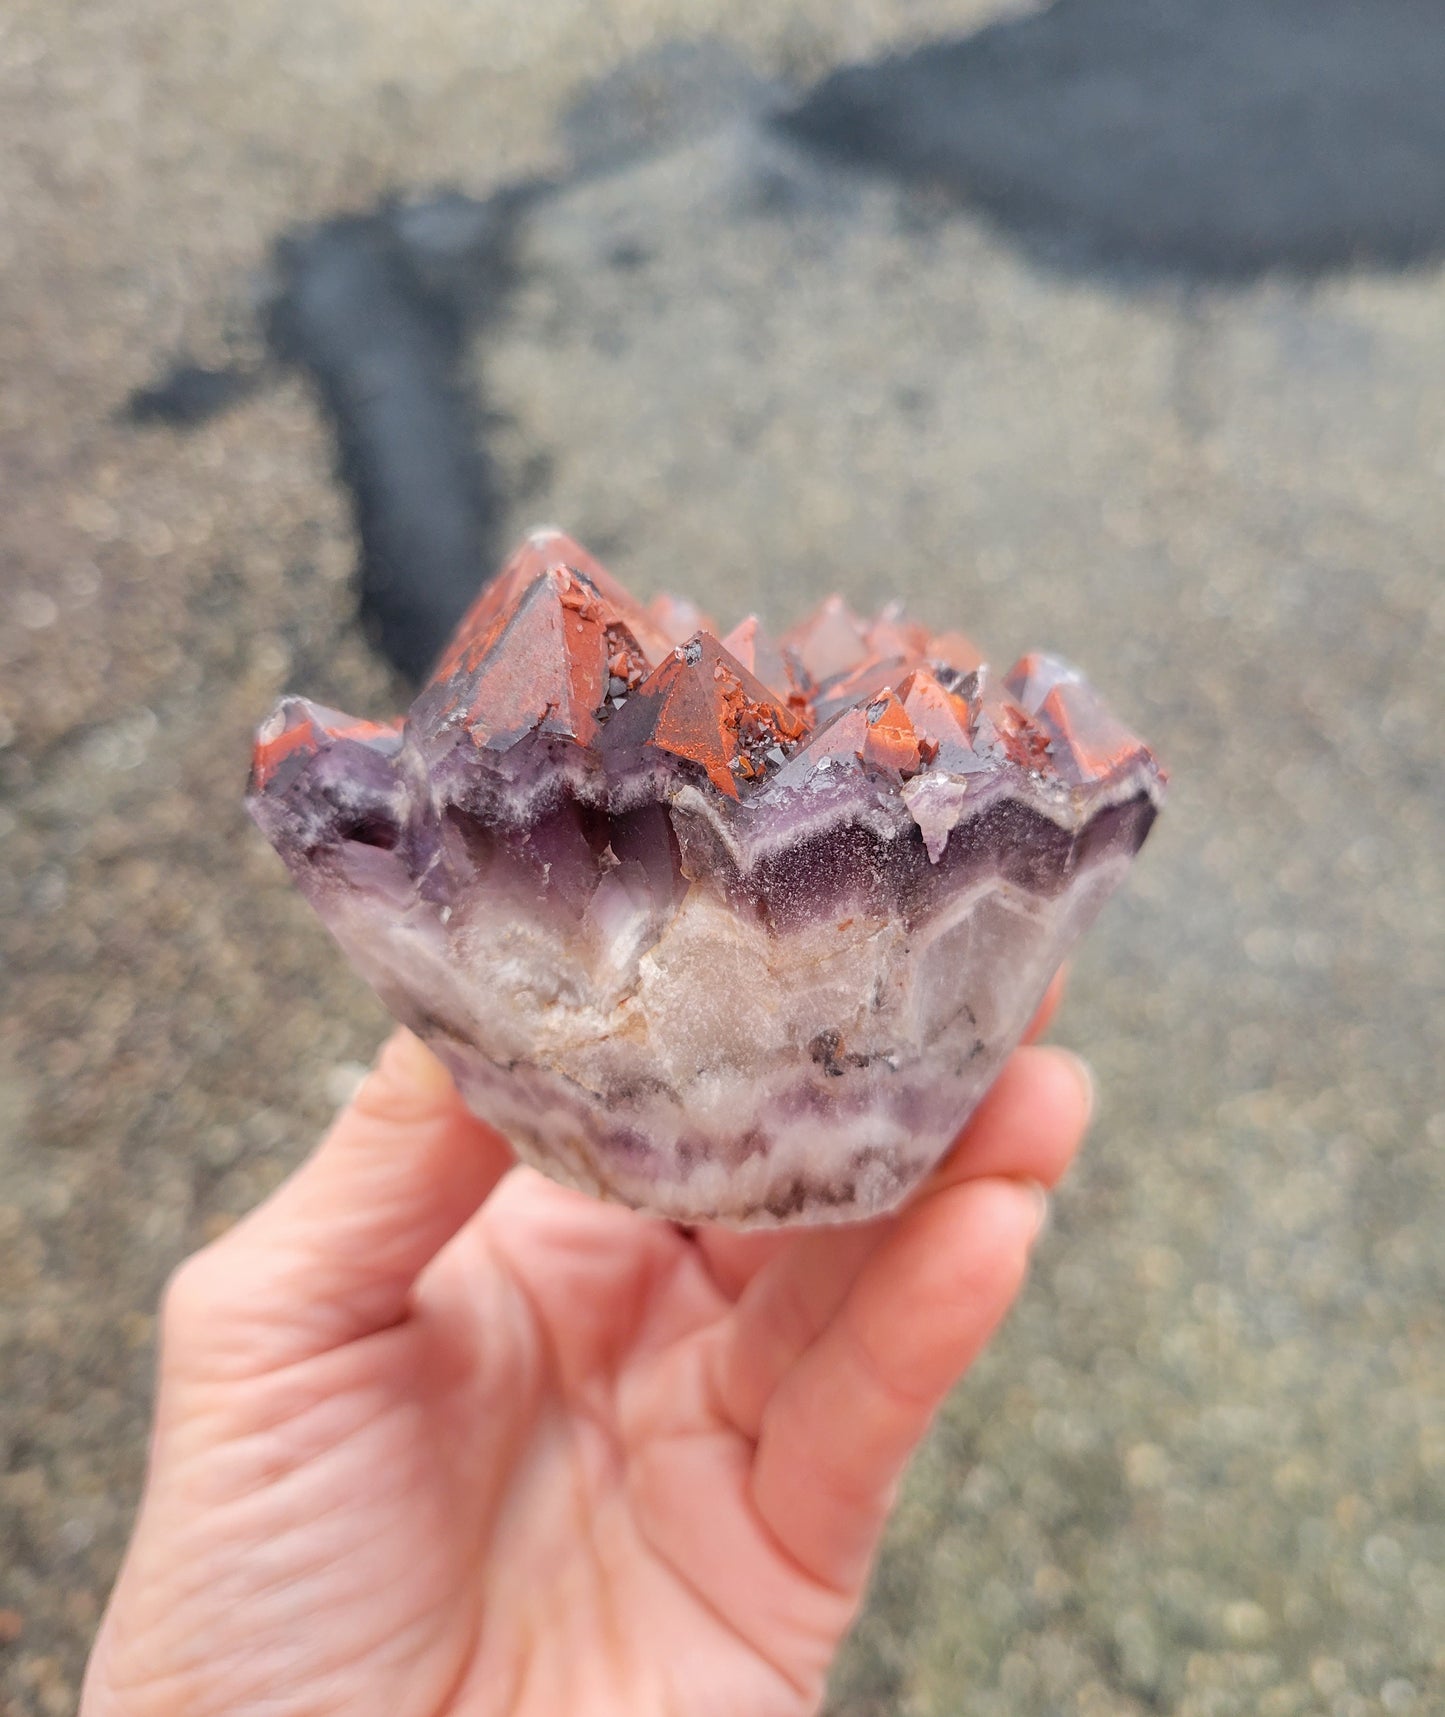 Red Capped Amethyst from India (W 3 3/8 X L 2 7/8 X H 2 inches)